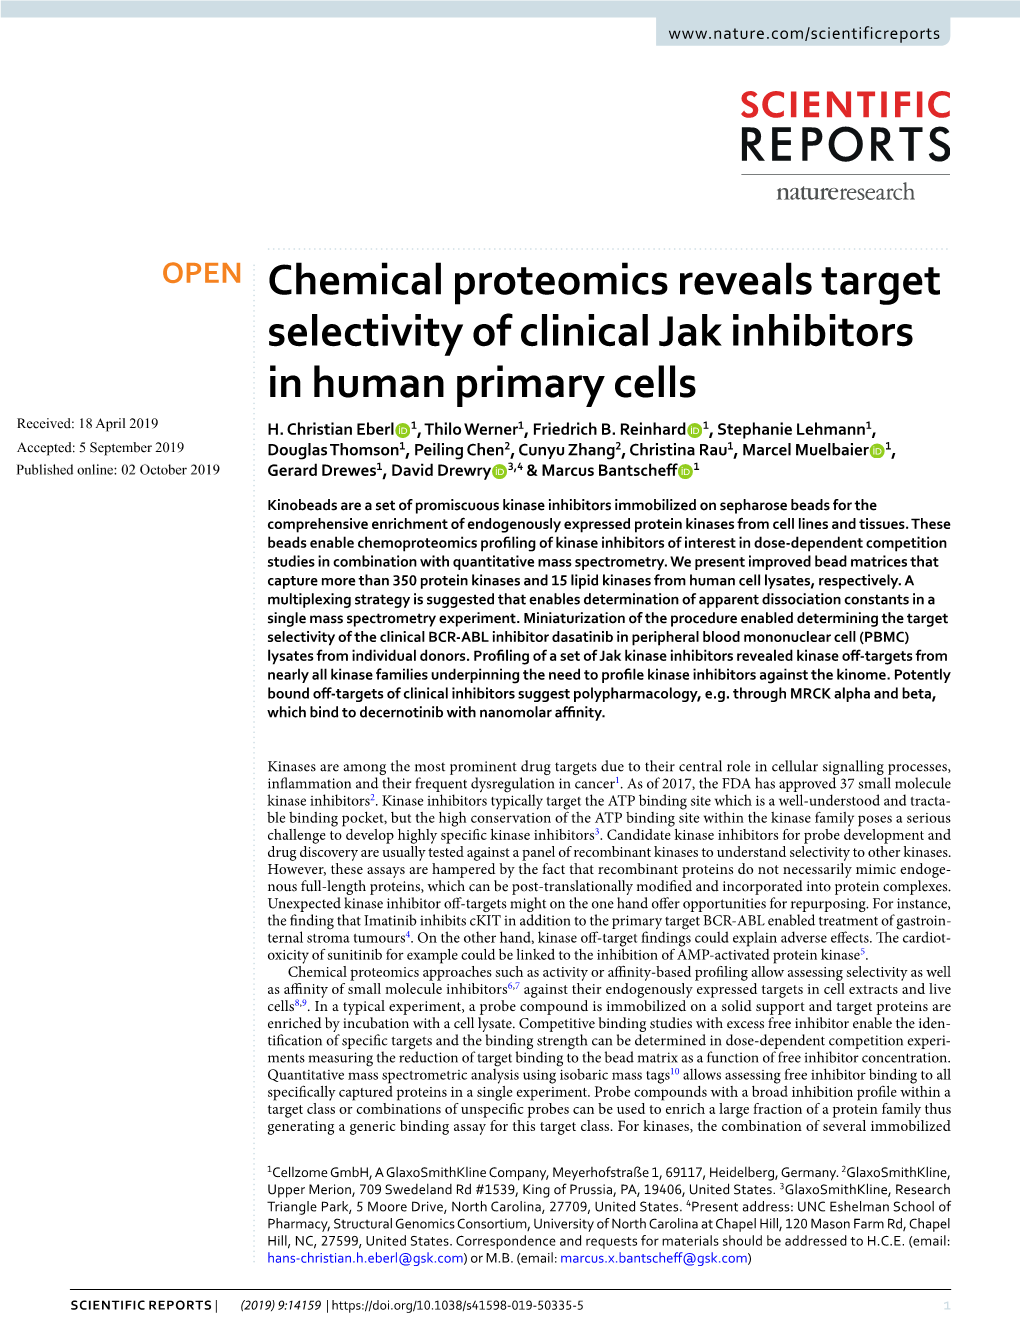 Chemical Proteomics Reveals Target Selectivity of Clinical Jak Inhibitors in Human Primary Cells Received: 18 April 2019 H